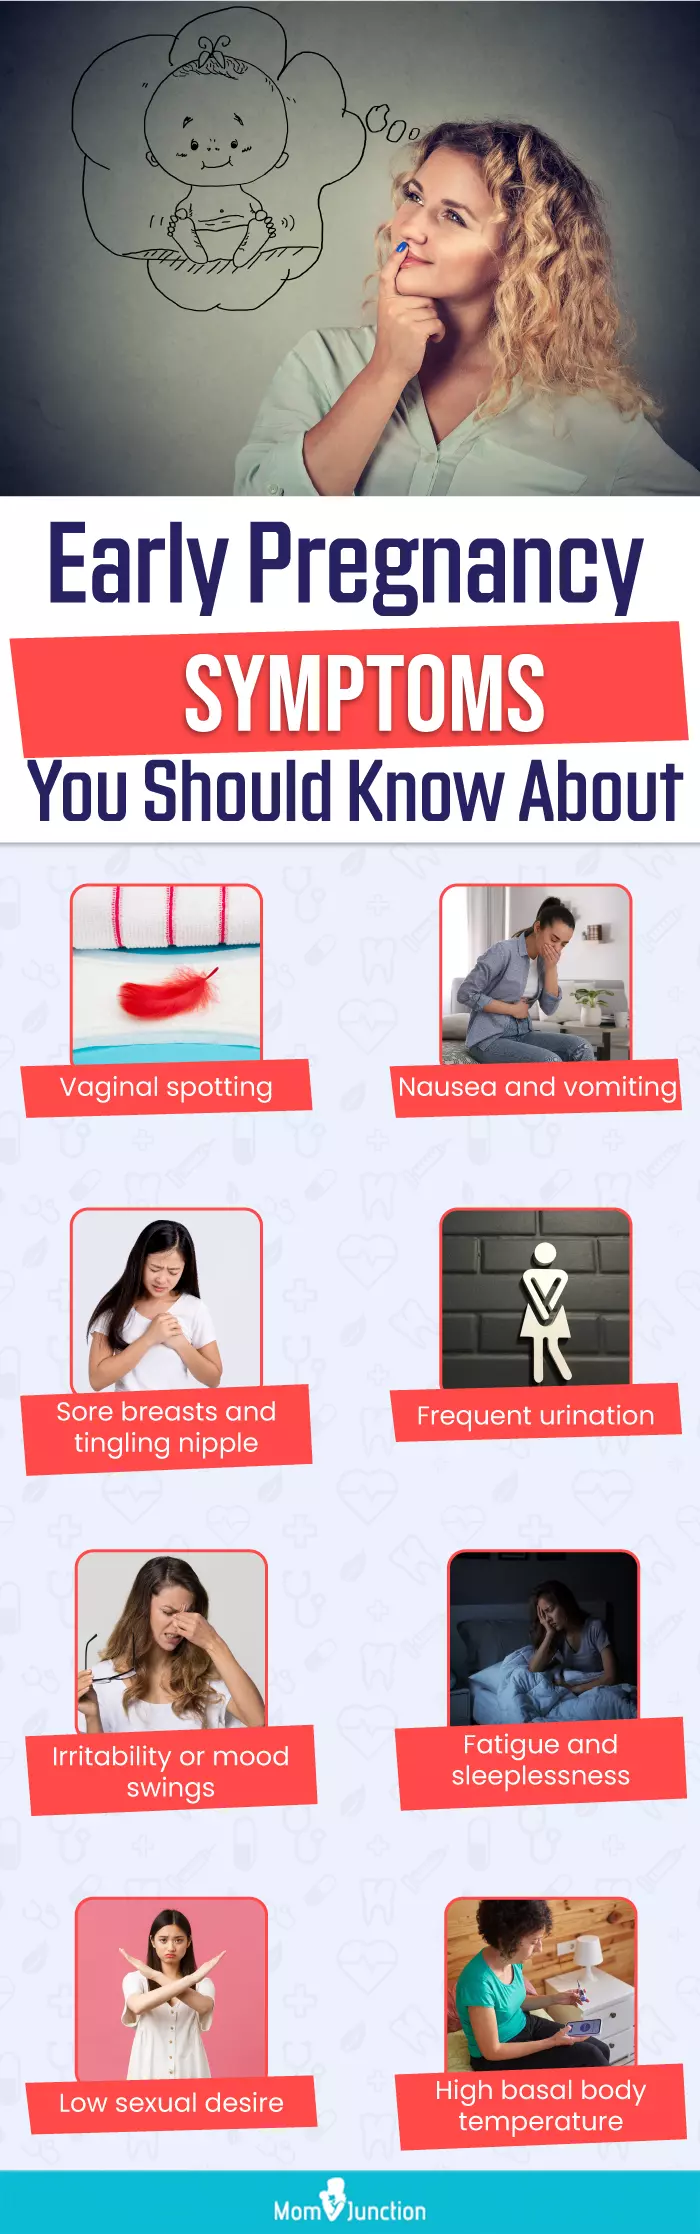 early pregnancy symptoms you should know about (infographic)